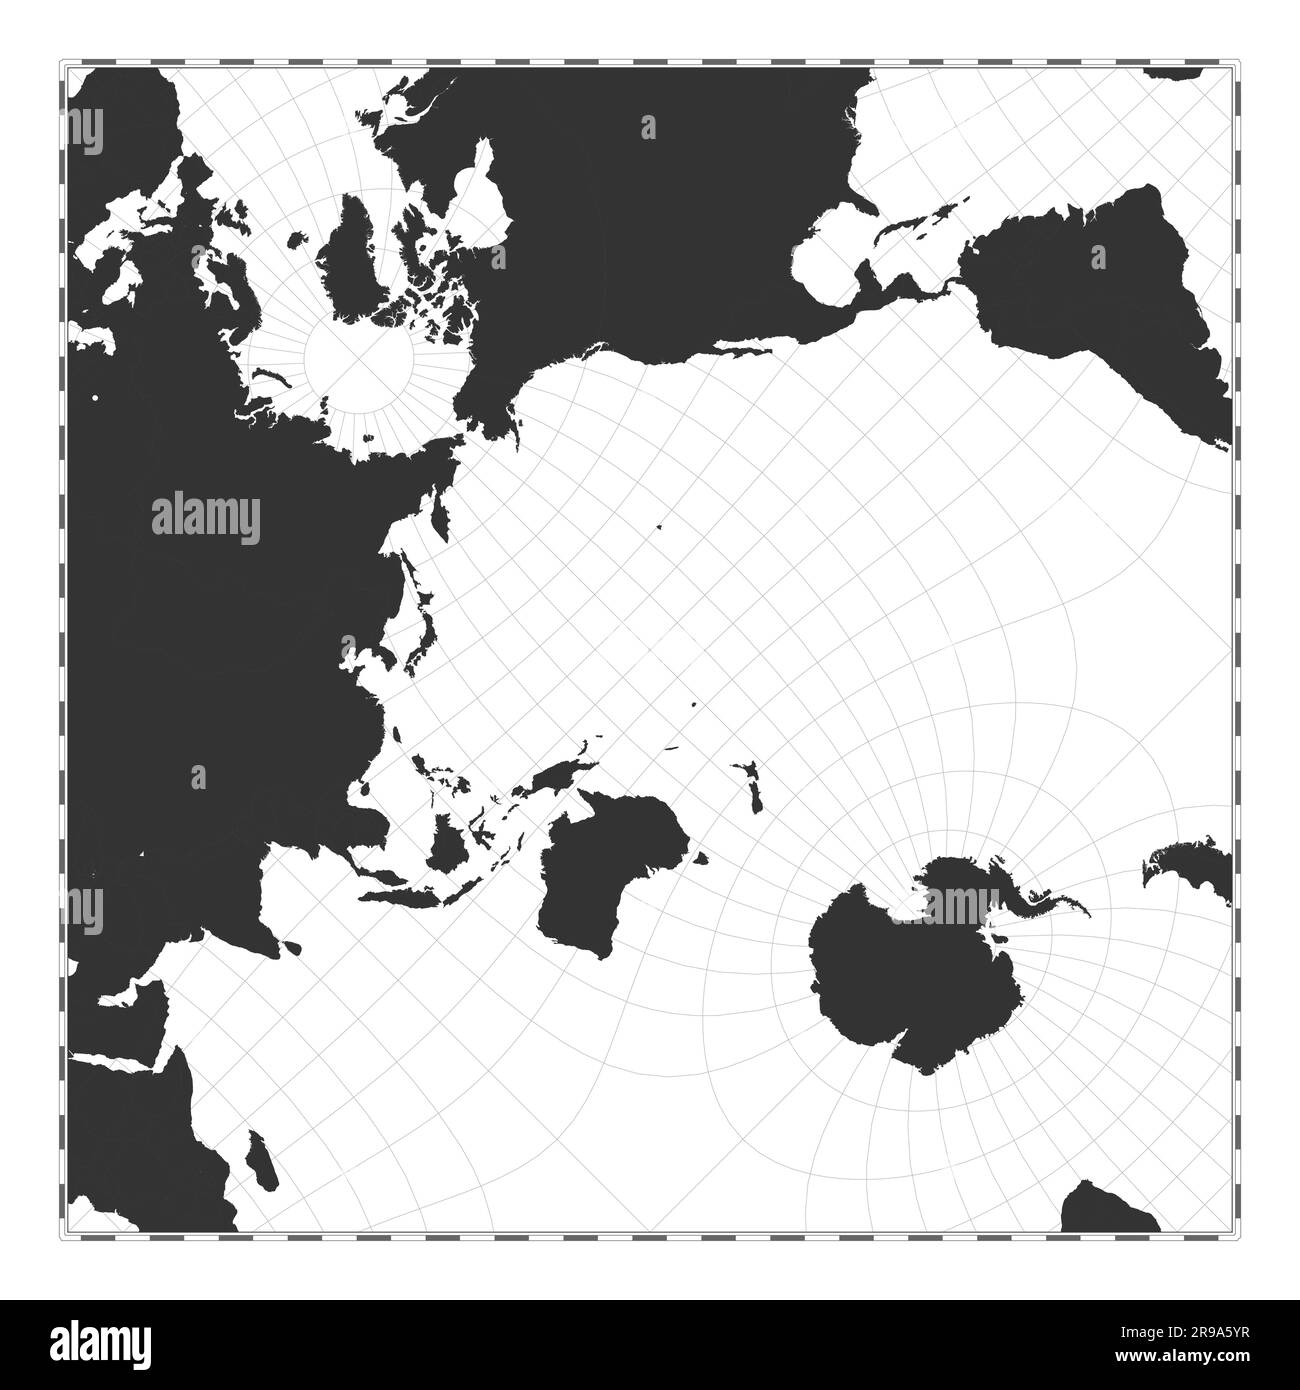 Vector world map. Peirce quincuncial projection. Plain world geographical map with latitude and longitude lines. Centered to 180deg longitude. Vector Stock Vector